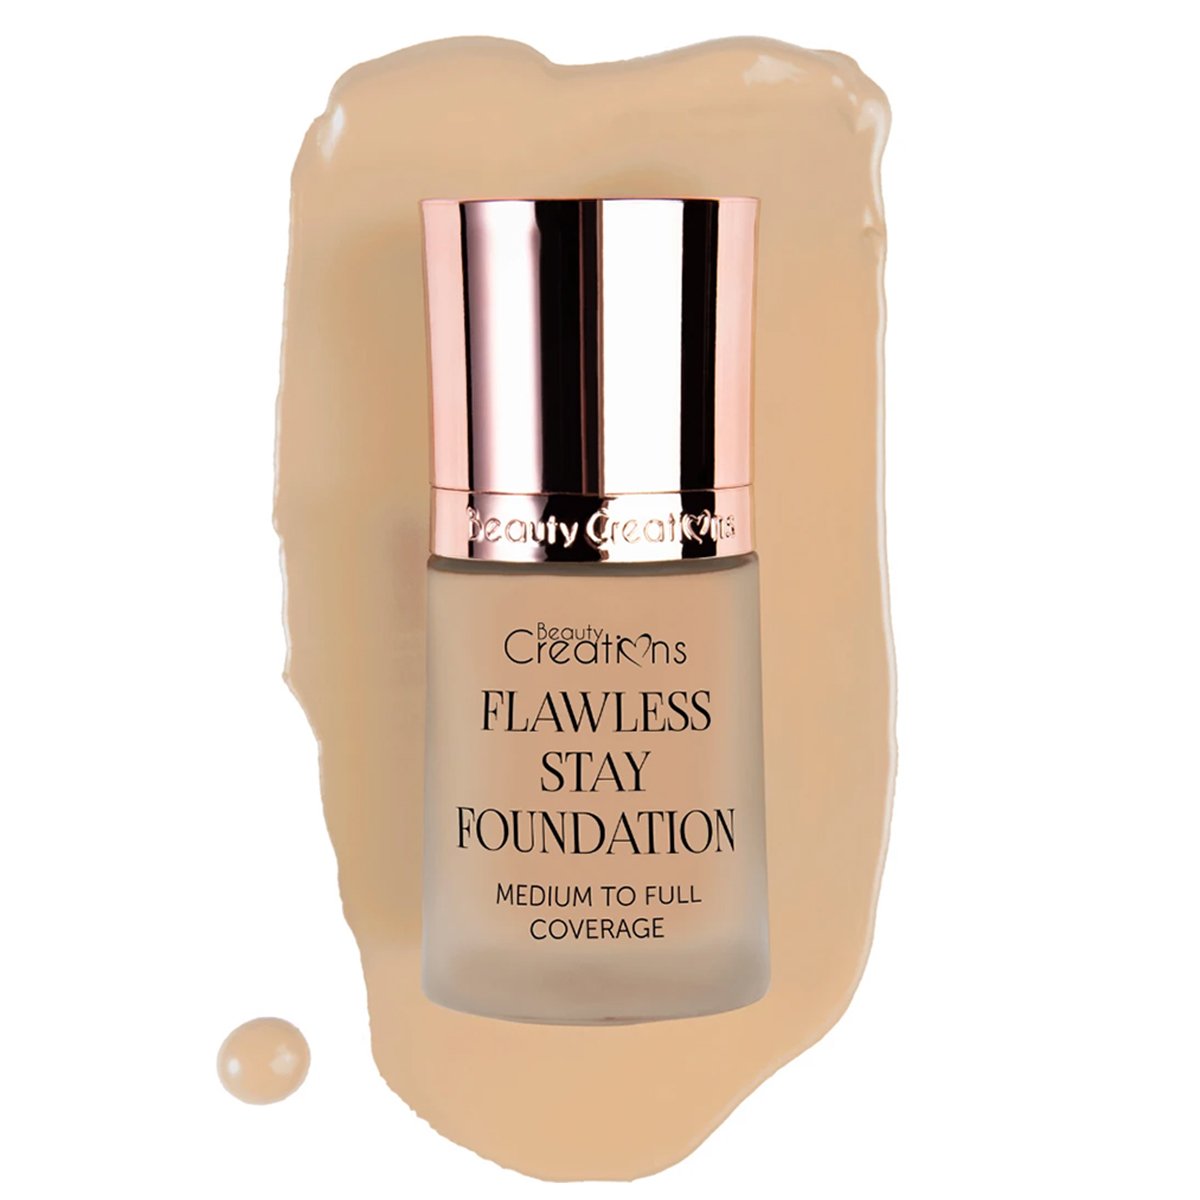 FLAWLESS STAY FOUNDATION 4.5 - BEAUTY CREATIONS